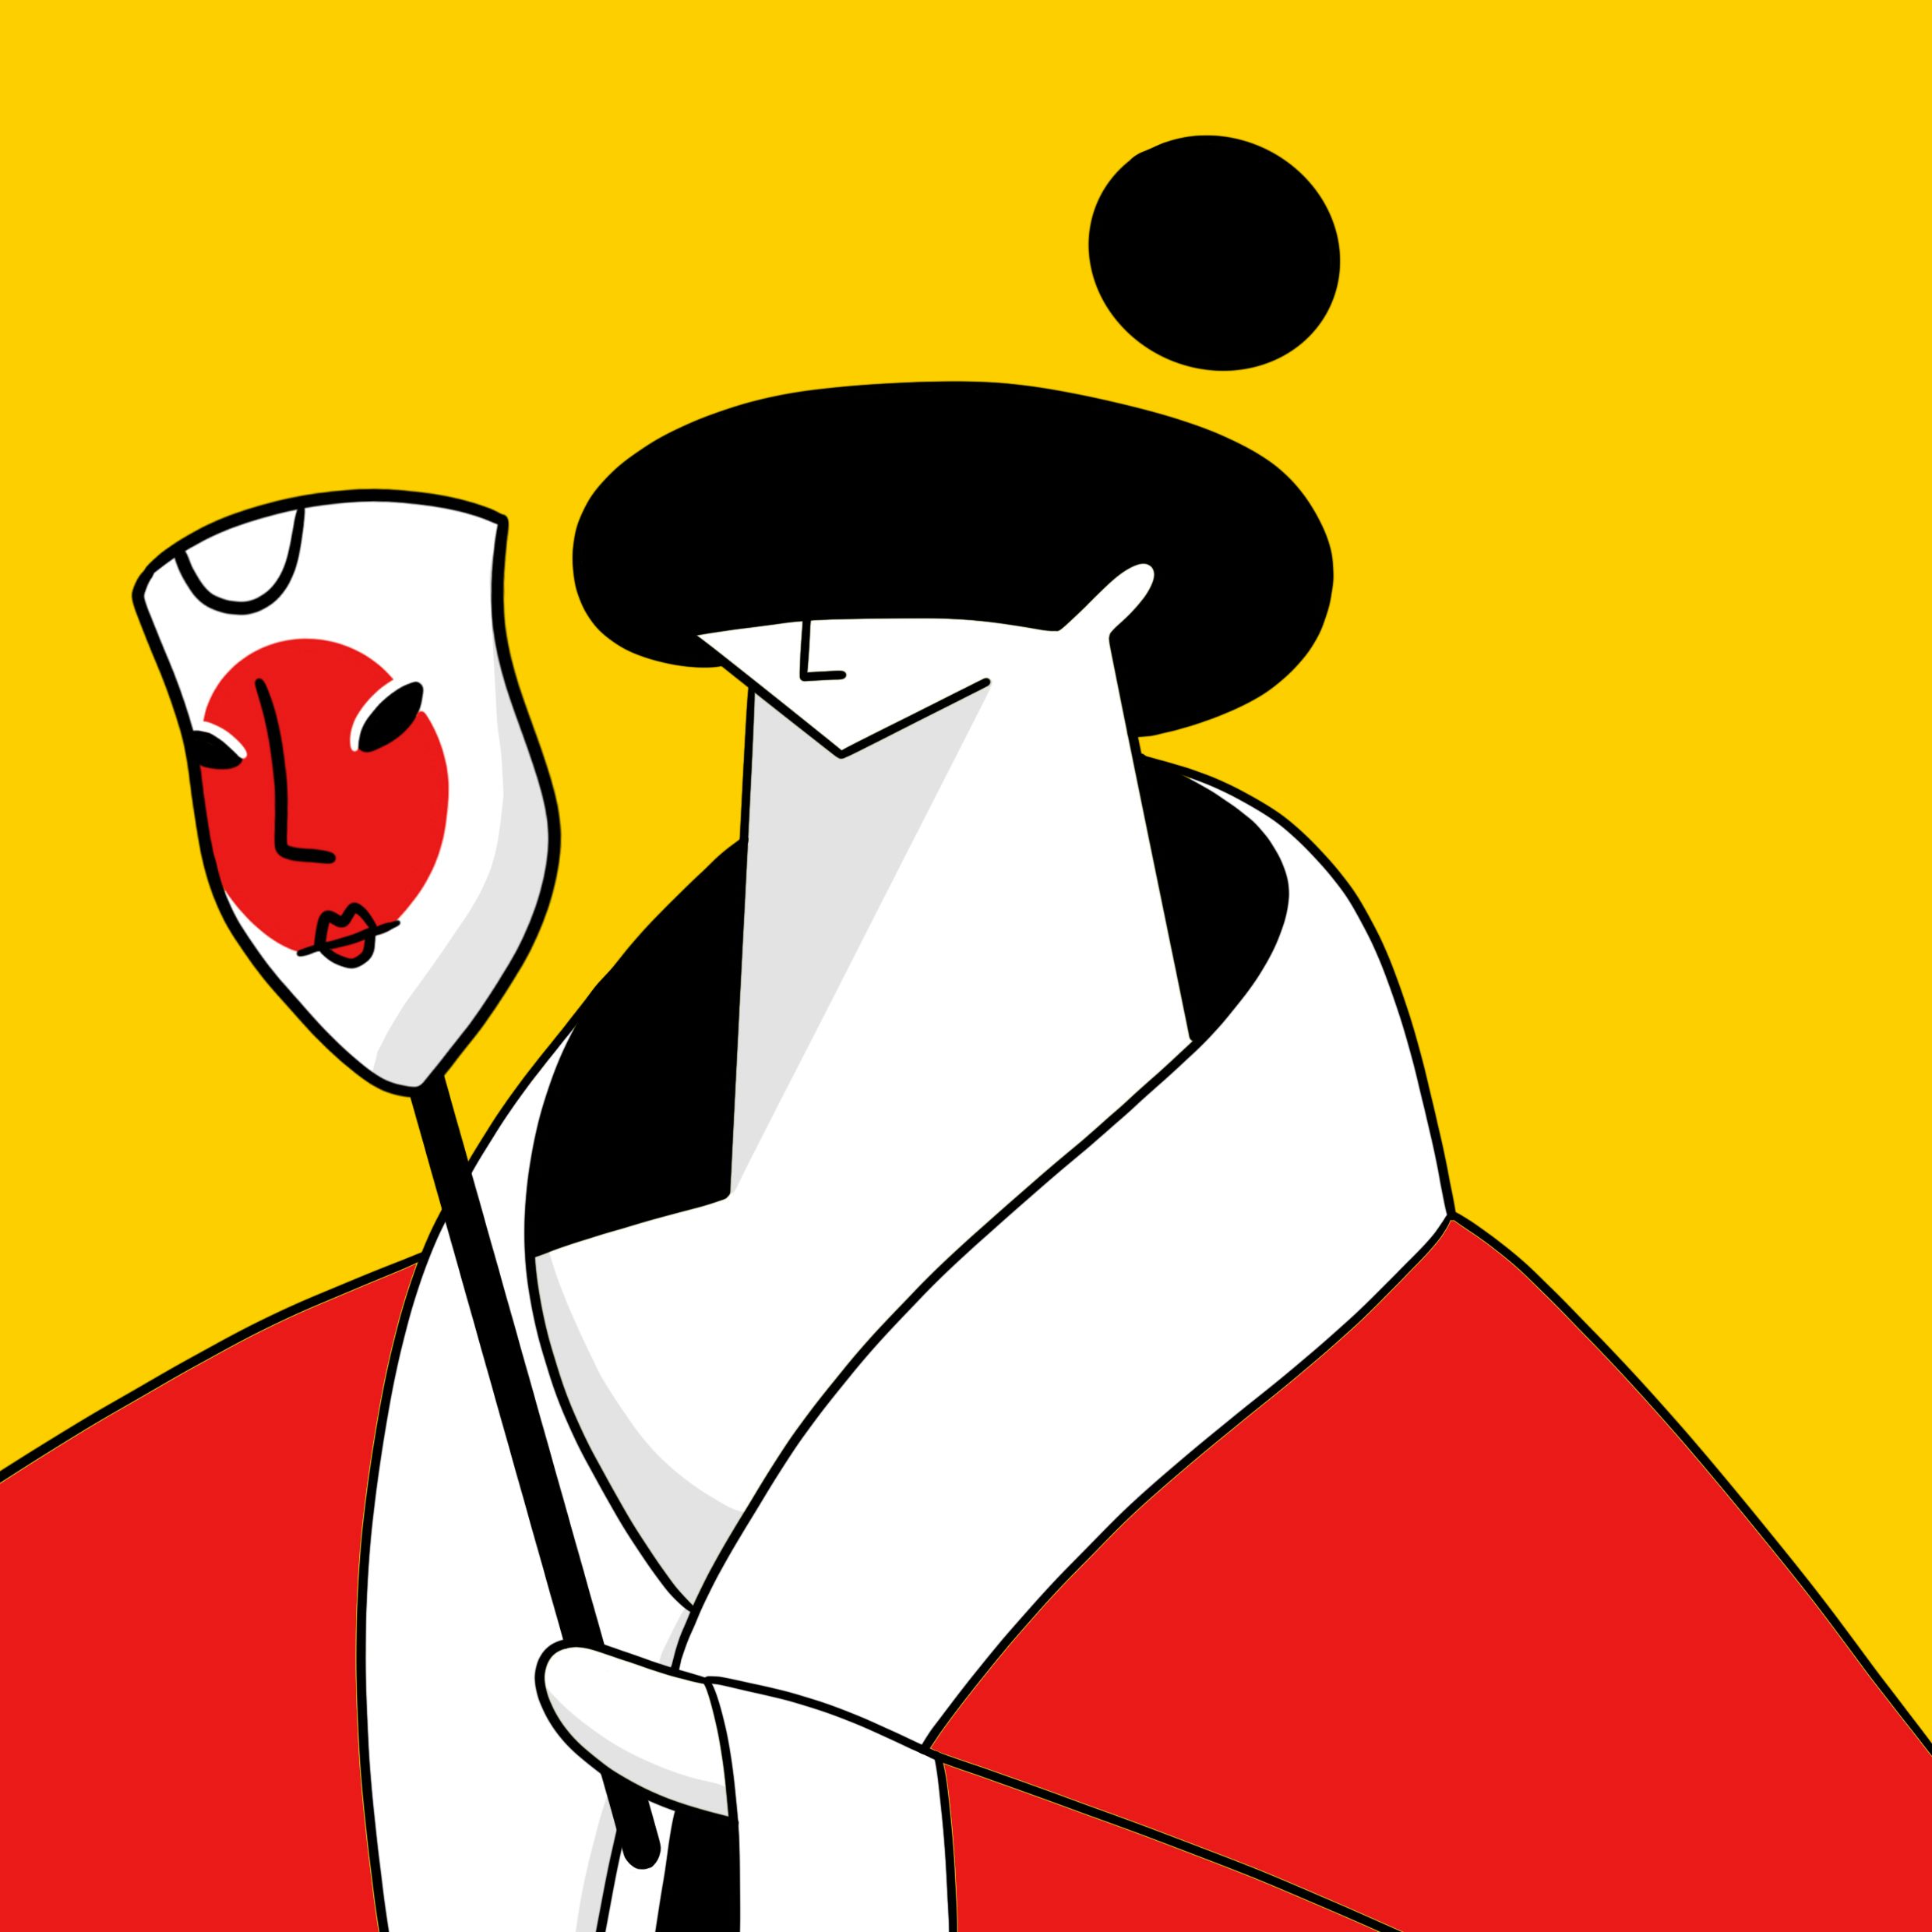 Unimpressed Geisha. One of upcoming NFT projects with Droplove Curated Selection.